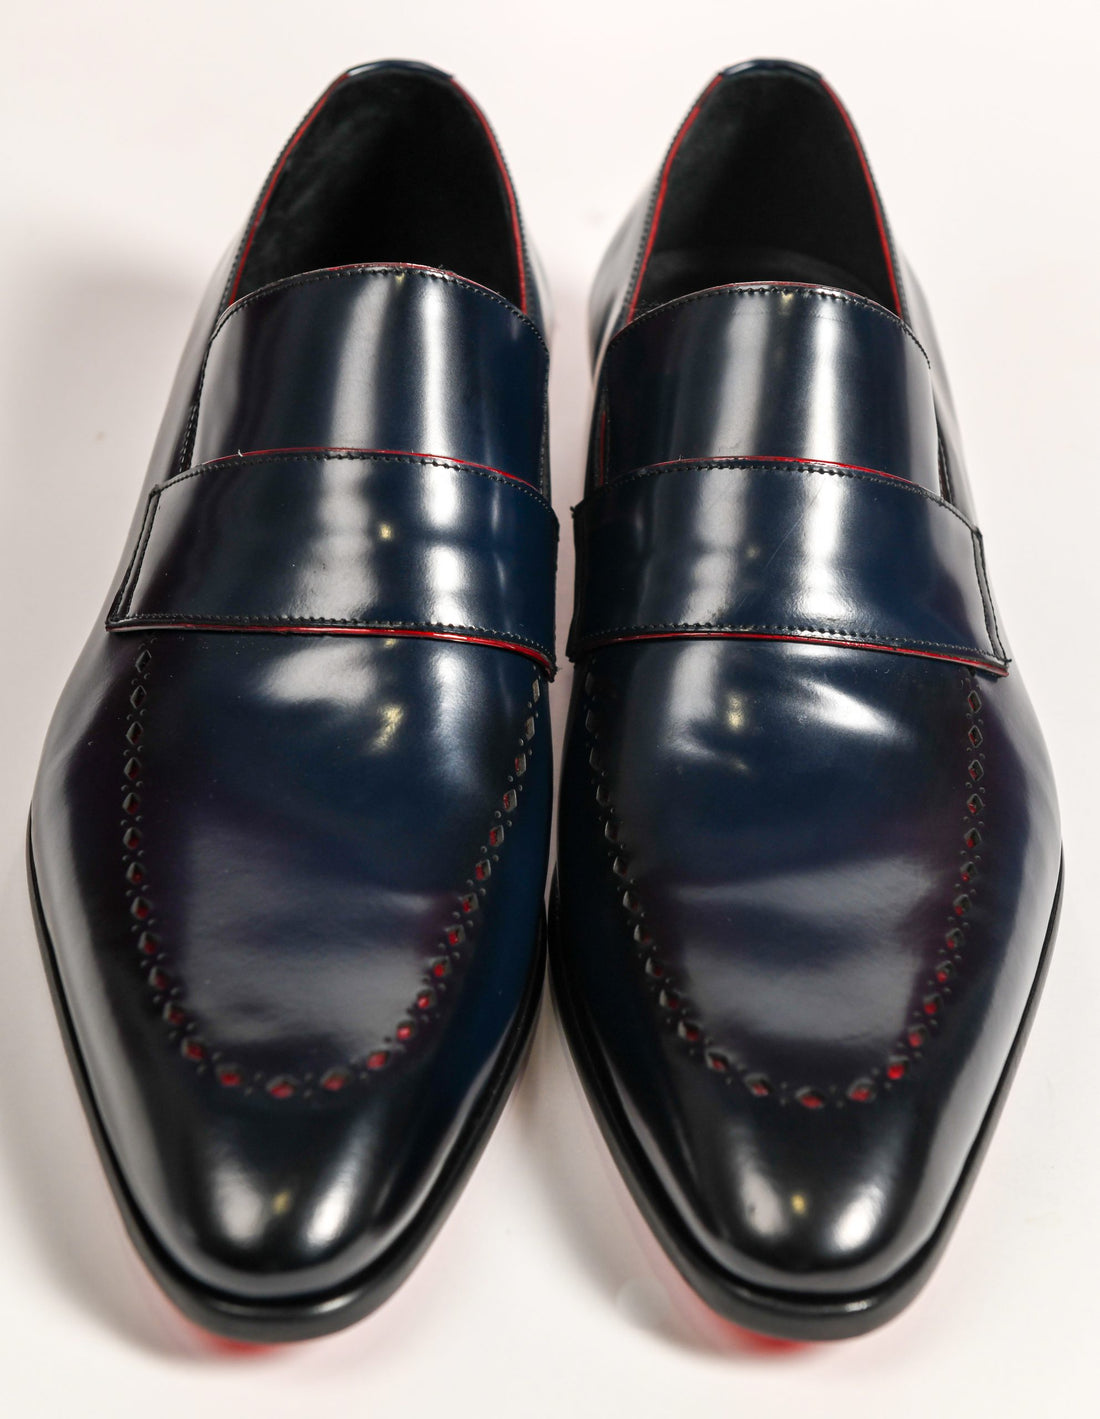 Connaisseur - Navy blue patent leather with red piping dress loafer